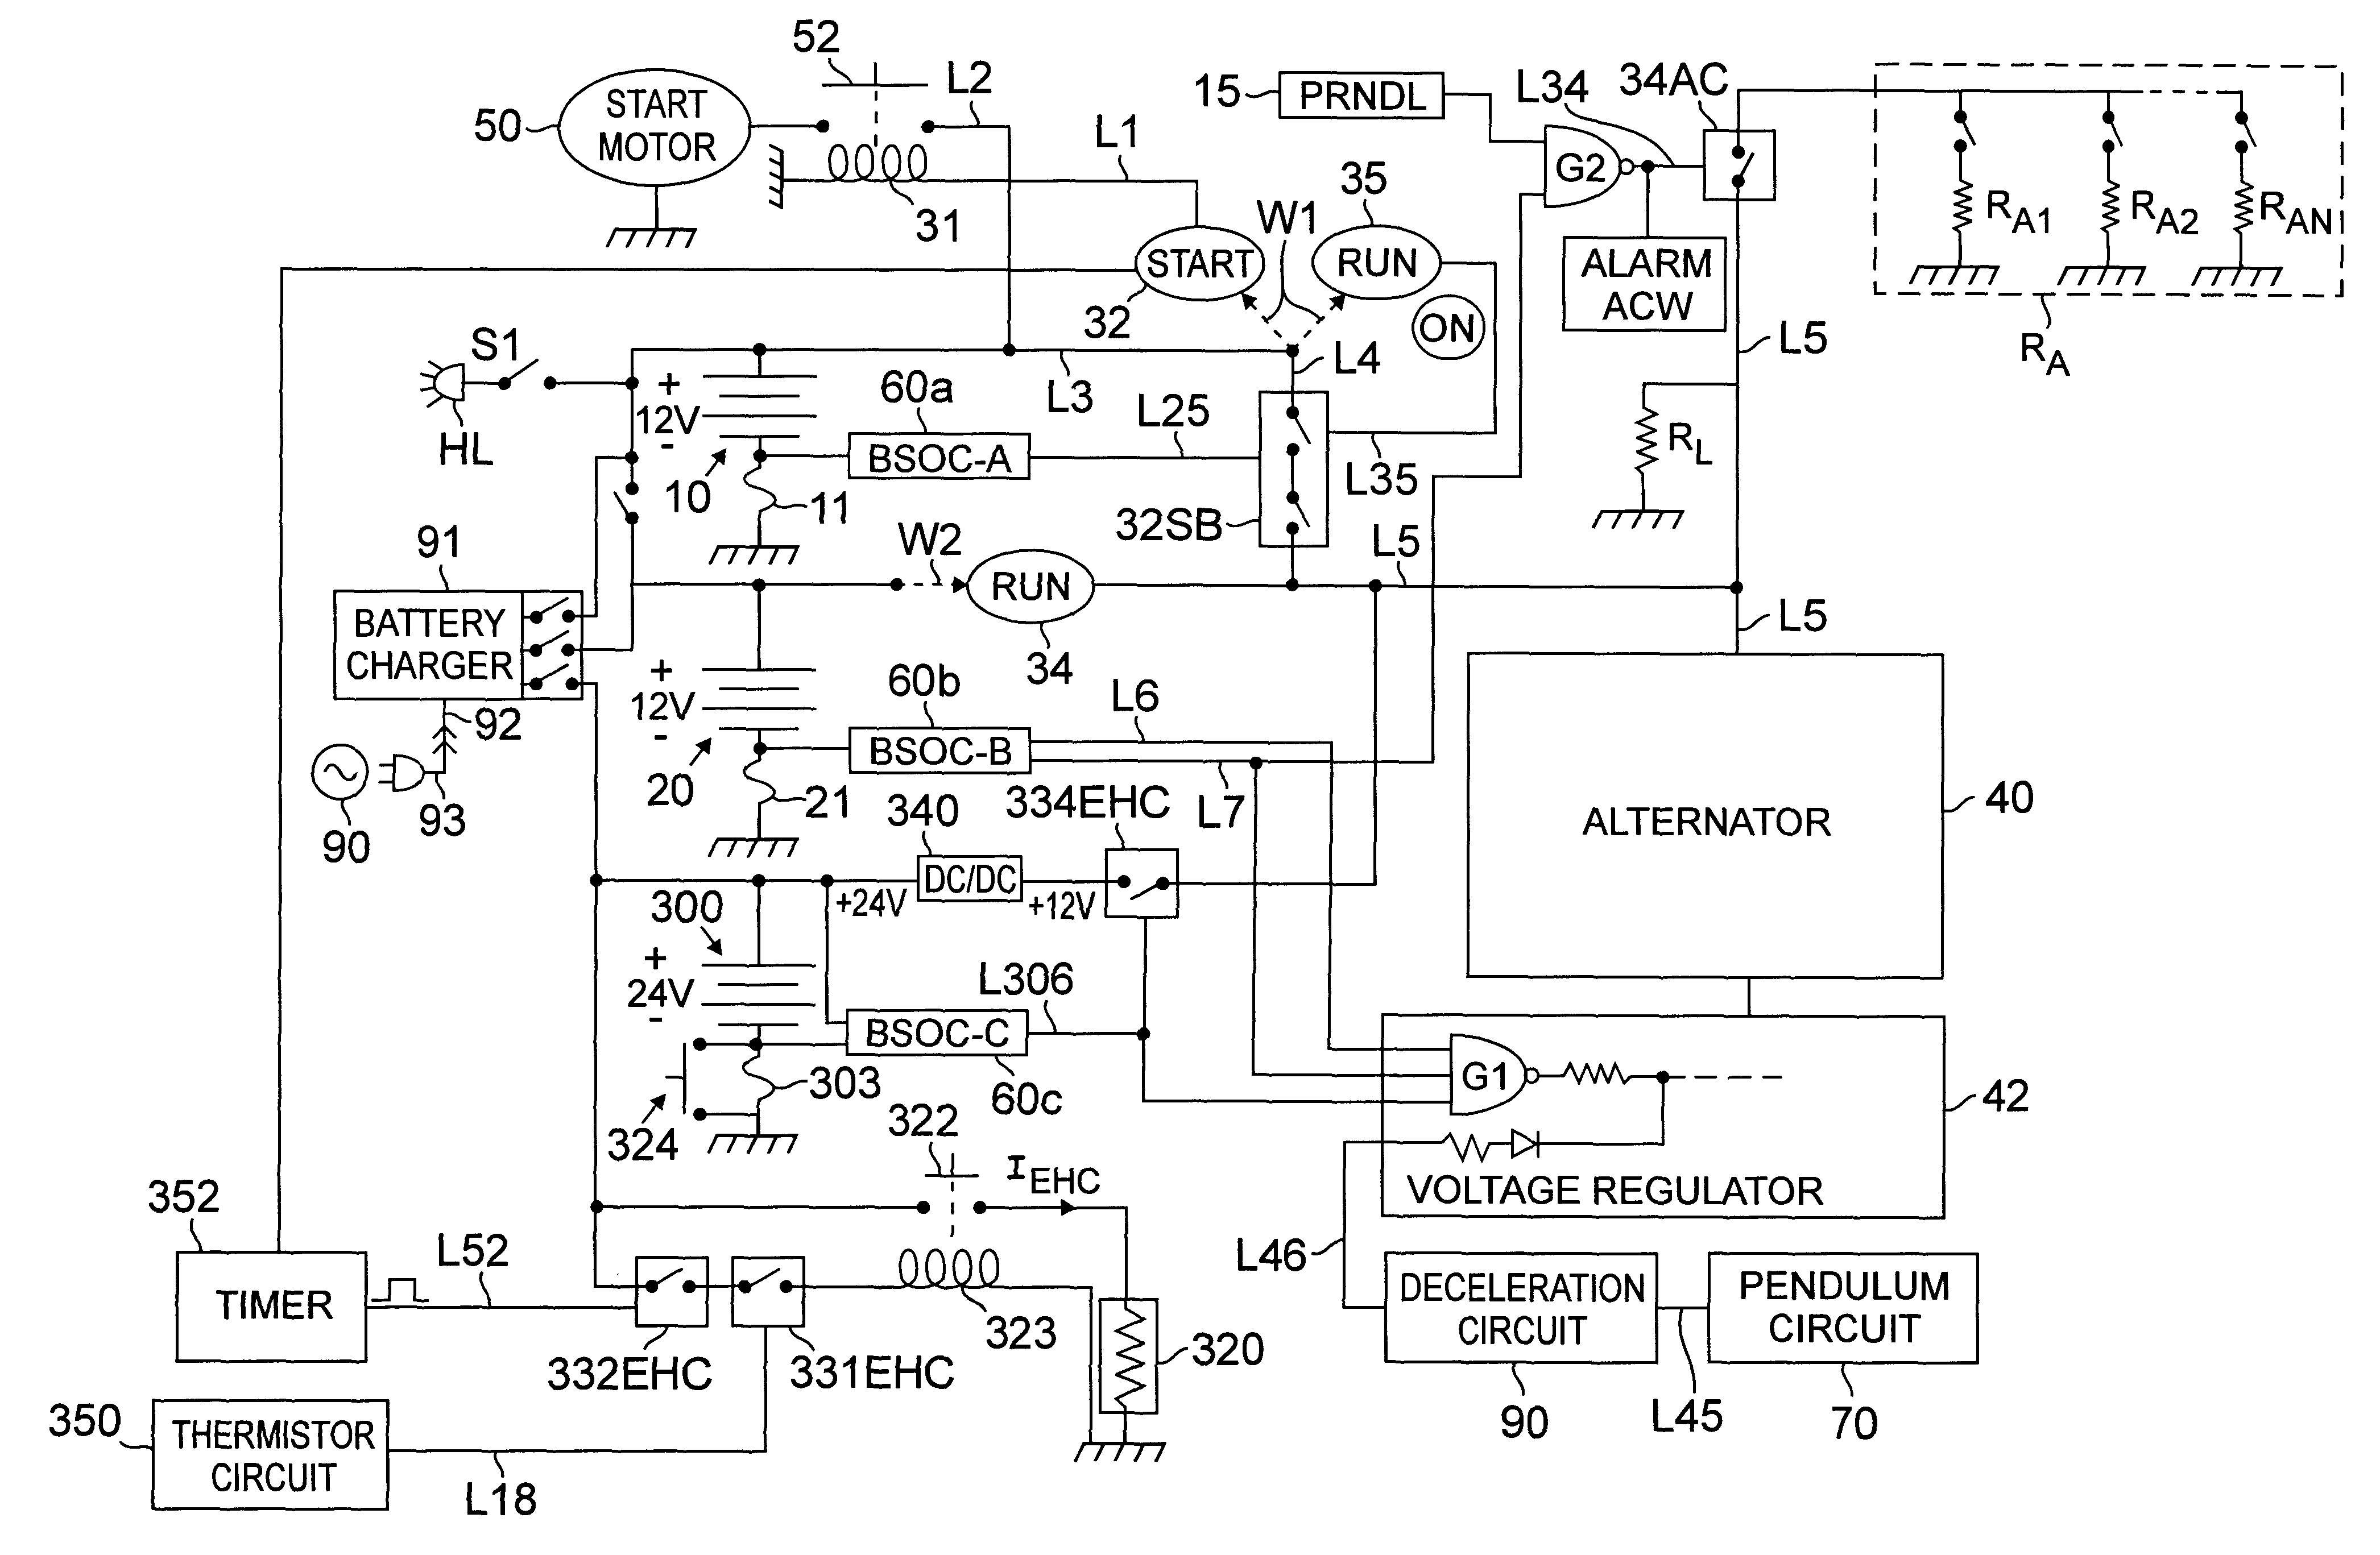 Multi-battery fuel saving and emission reduction system for automotive vehicles